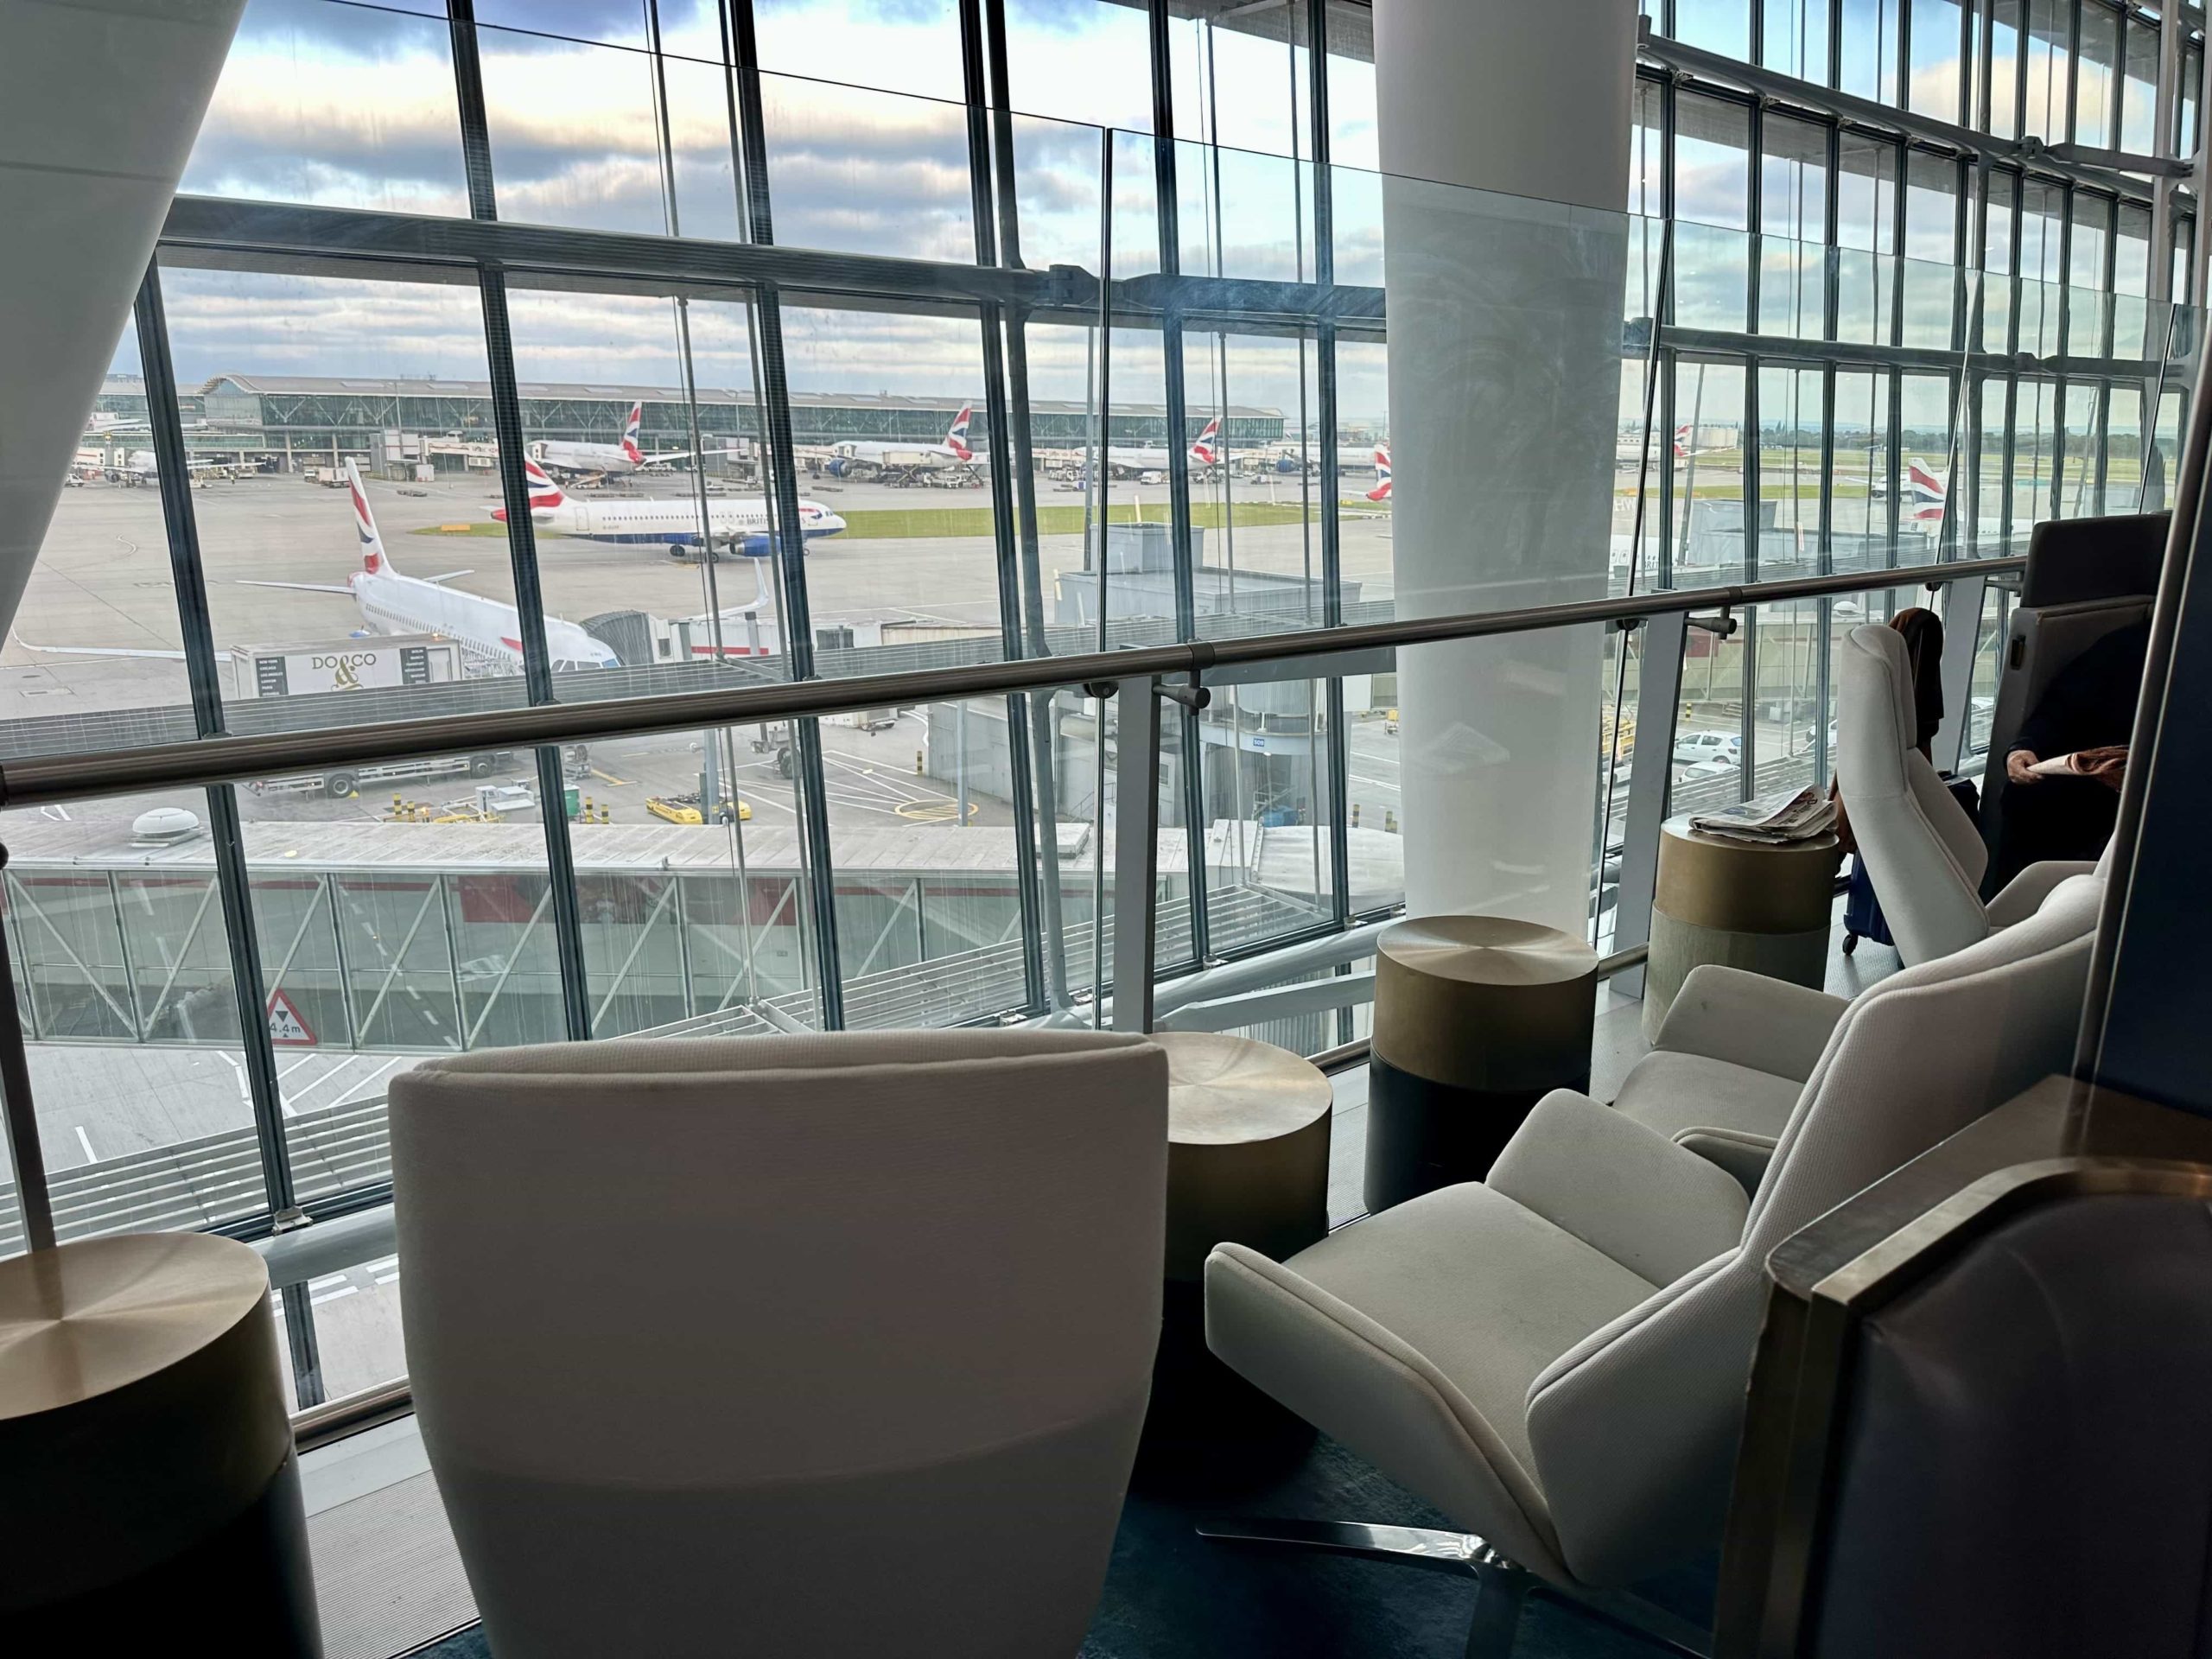 An arrangement of high-backed armchairs overlooking the apron at an airport